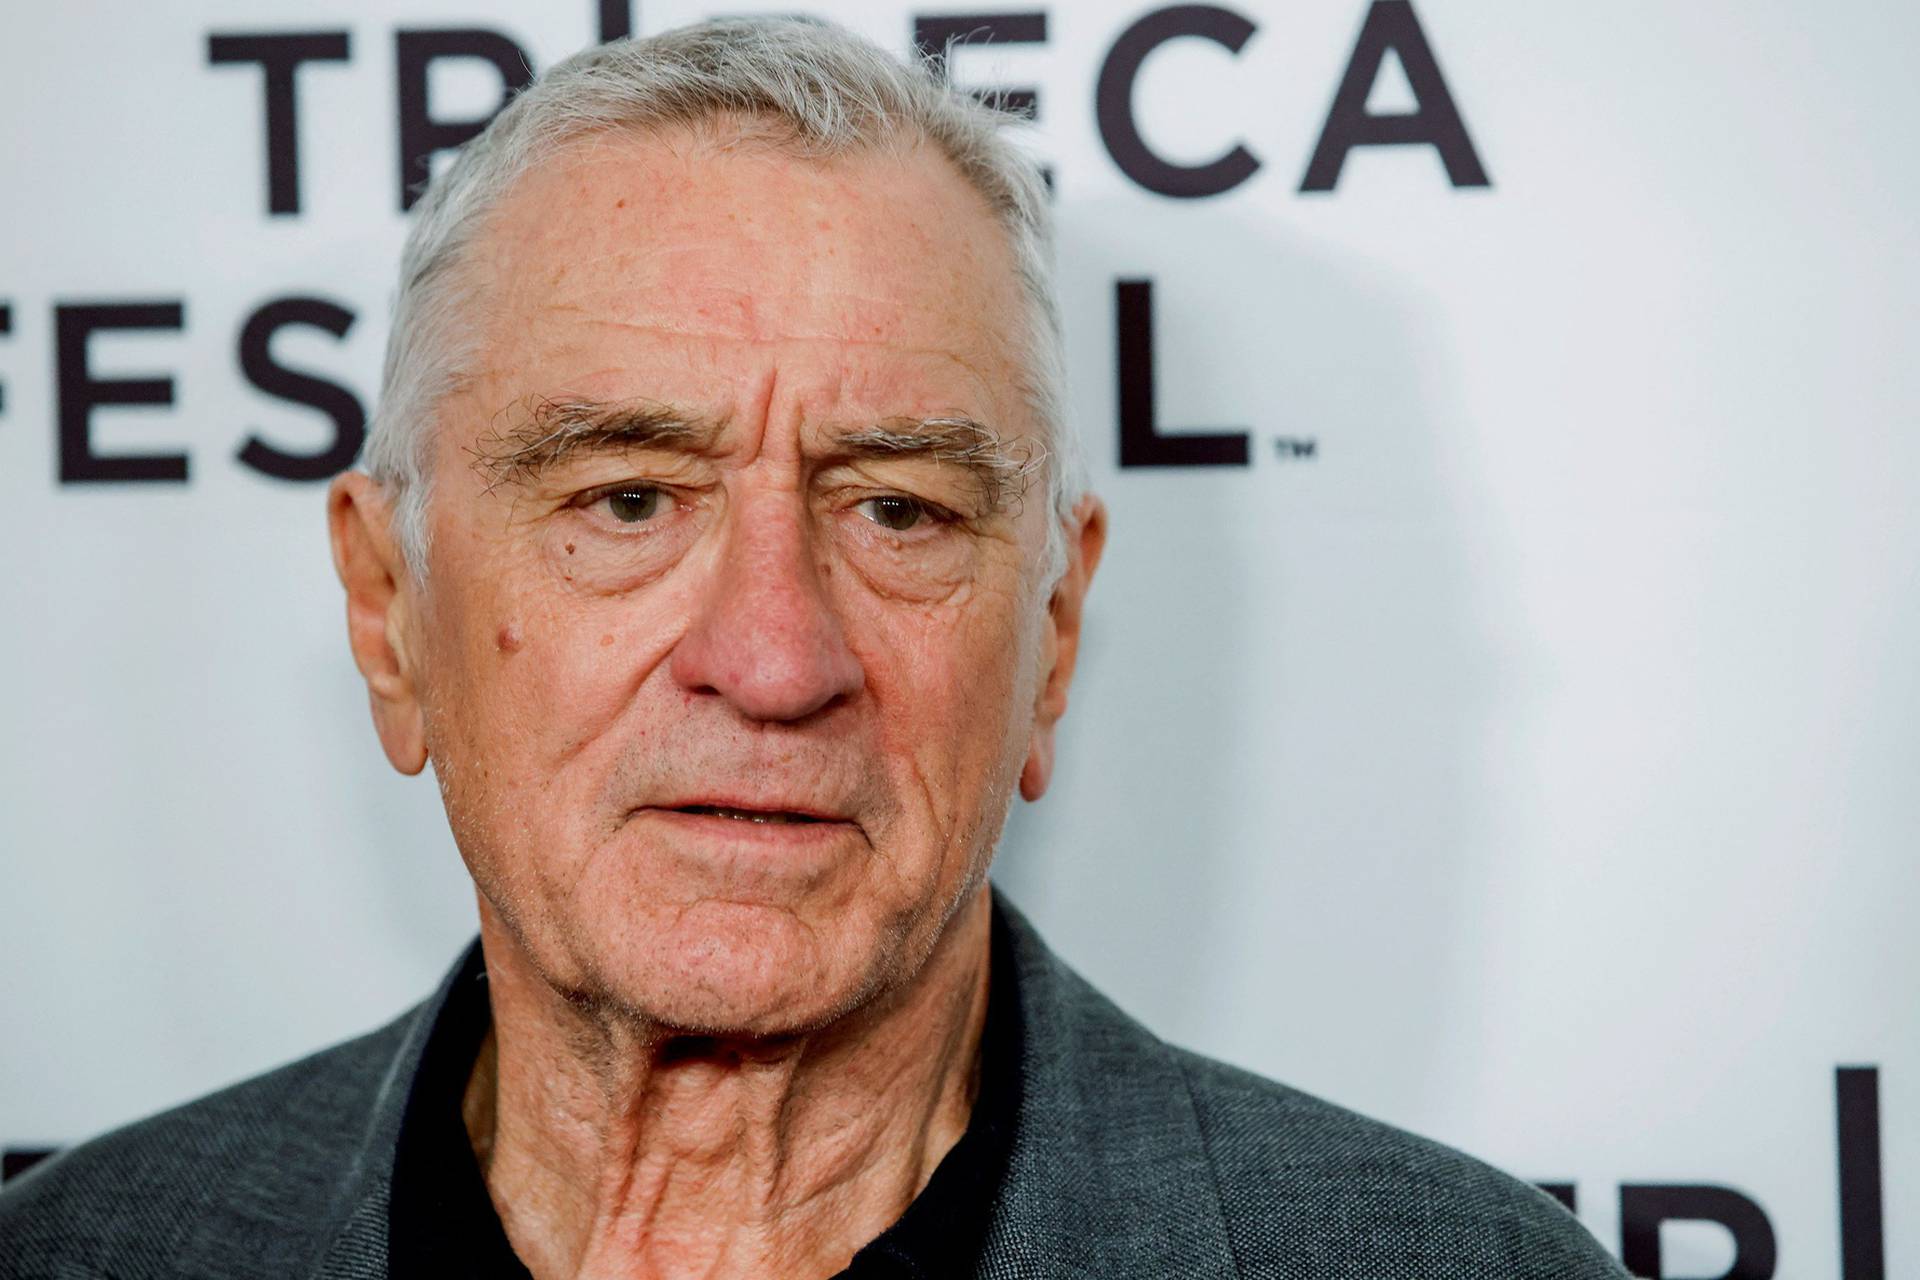 Actor Robert De Niro attends the screening of a 4K version of the film "Heat" during 2022 Tribeca Festival in New York